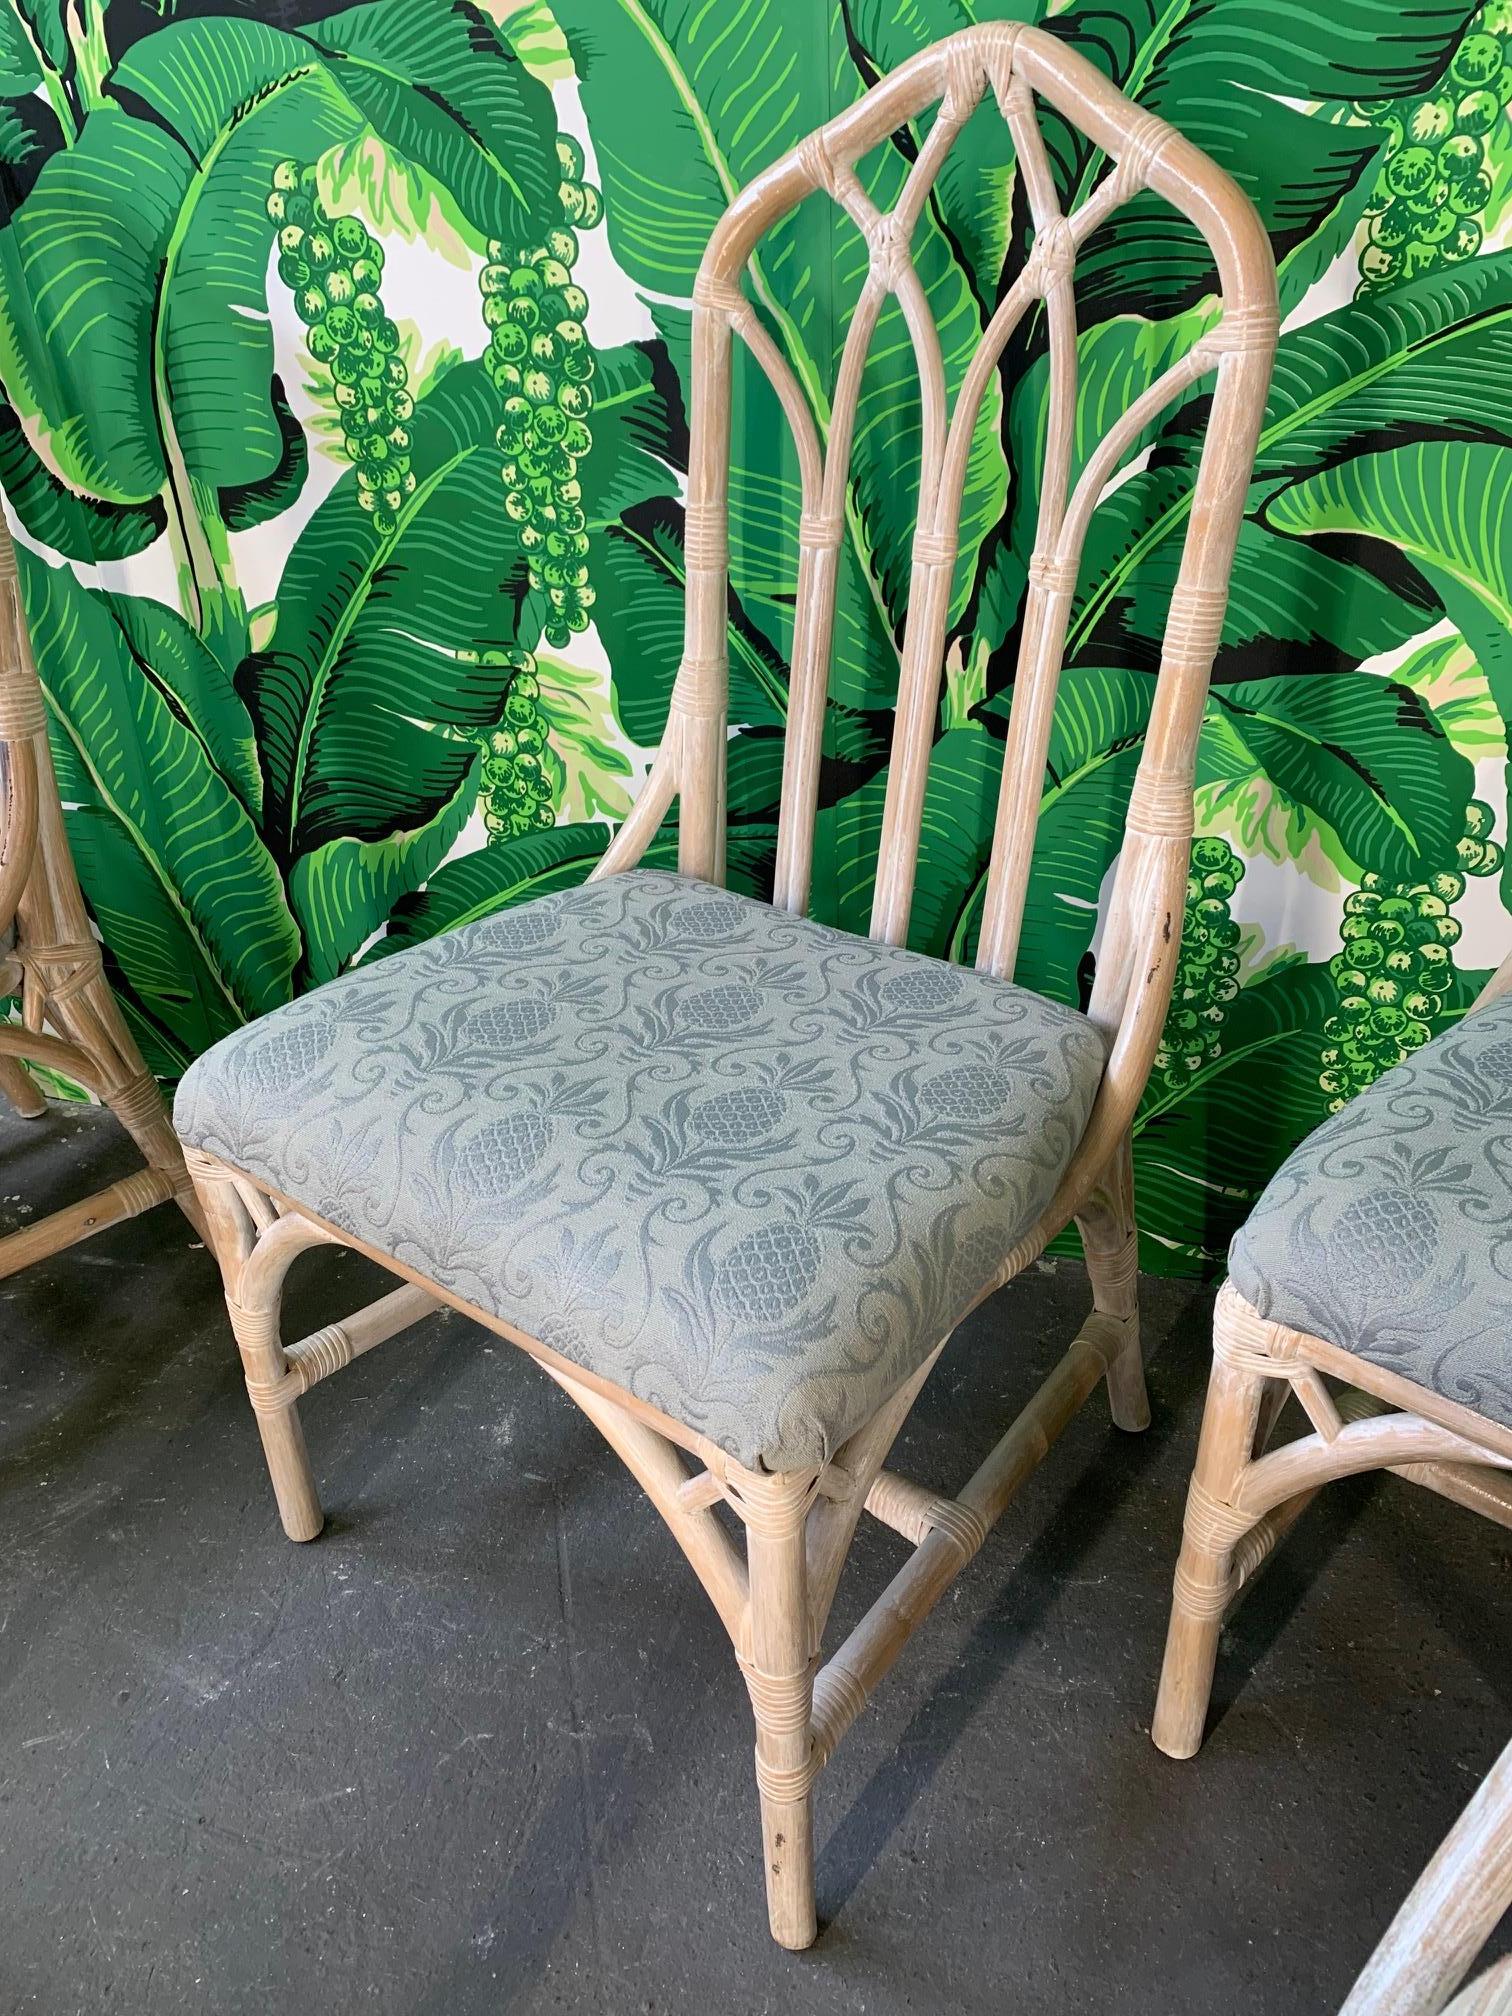 Set of 10 rattan dining chairs by Henry Link in excellent structural condition with minor abrasions consistent with age. Four of the chairs have a different upholstery. Faux bamboo look with leather wrapping. One chair has one spot where leather